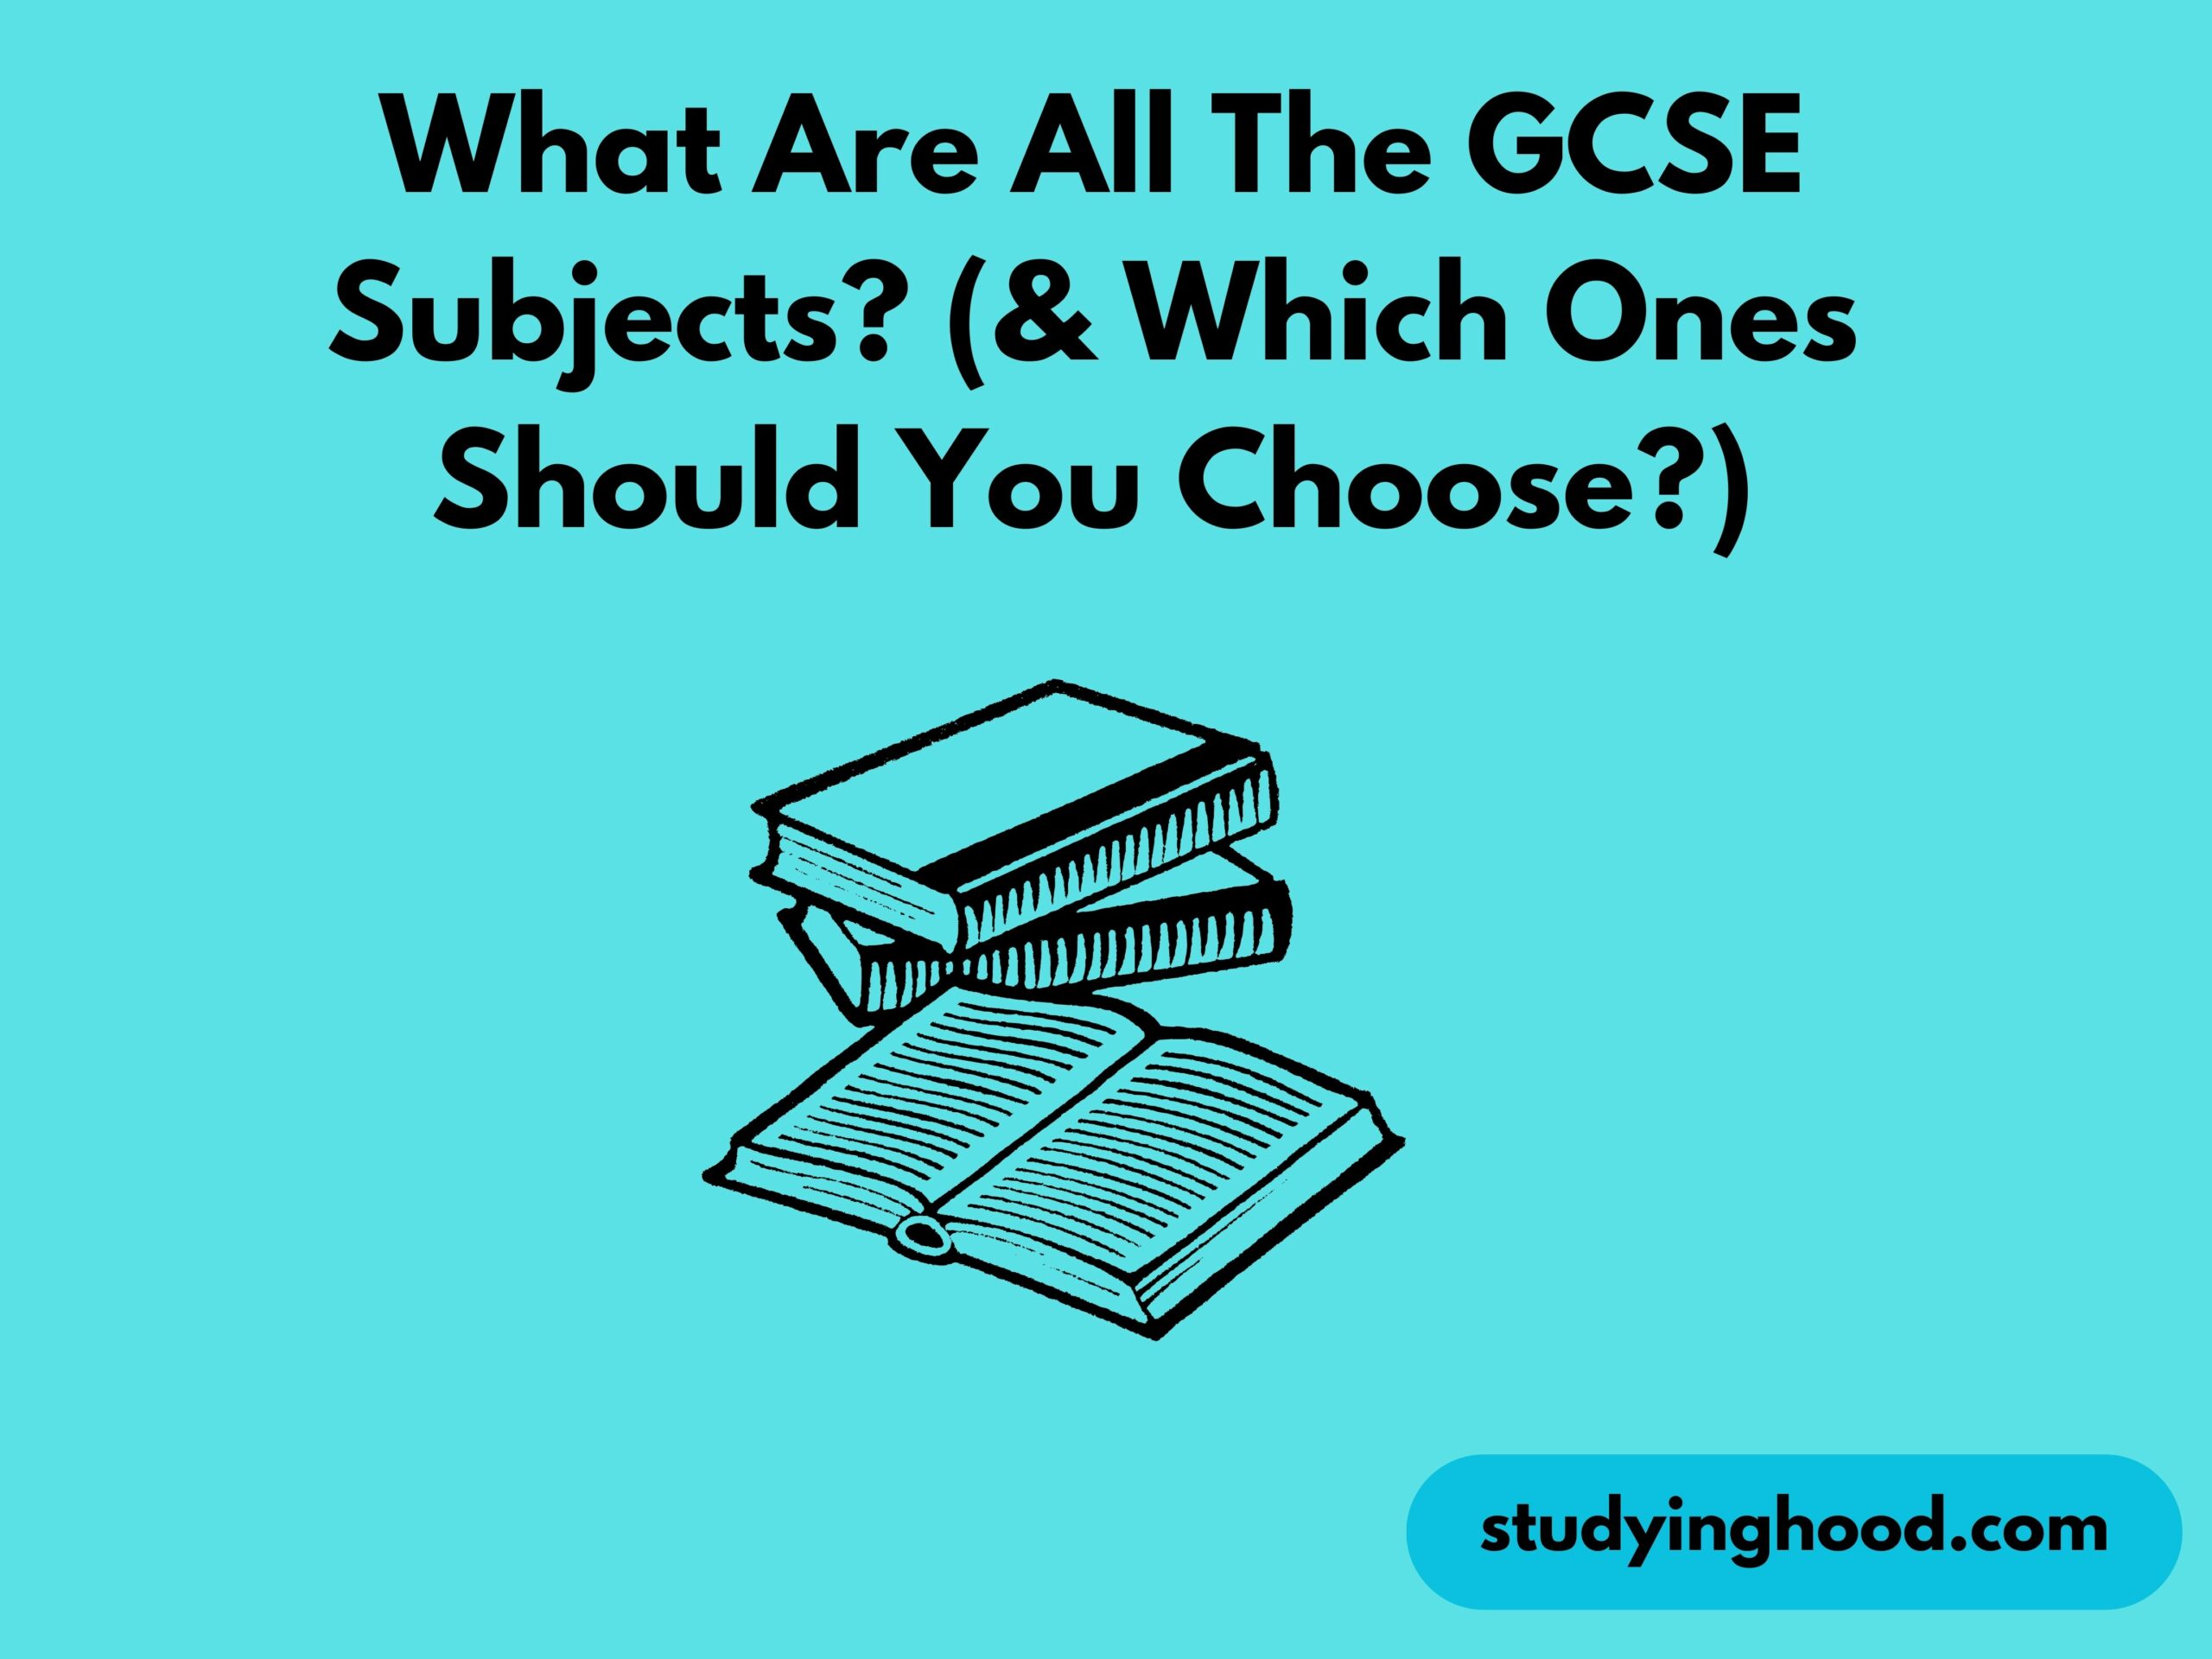 What Are All The GCSE Subjects? (& Which Ones Should You Choose?)